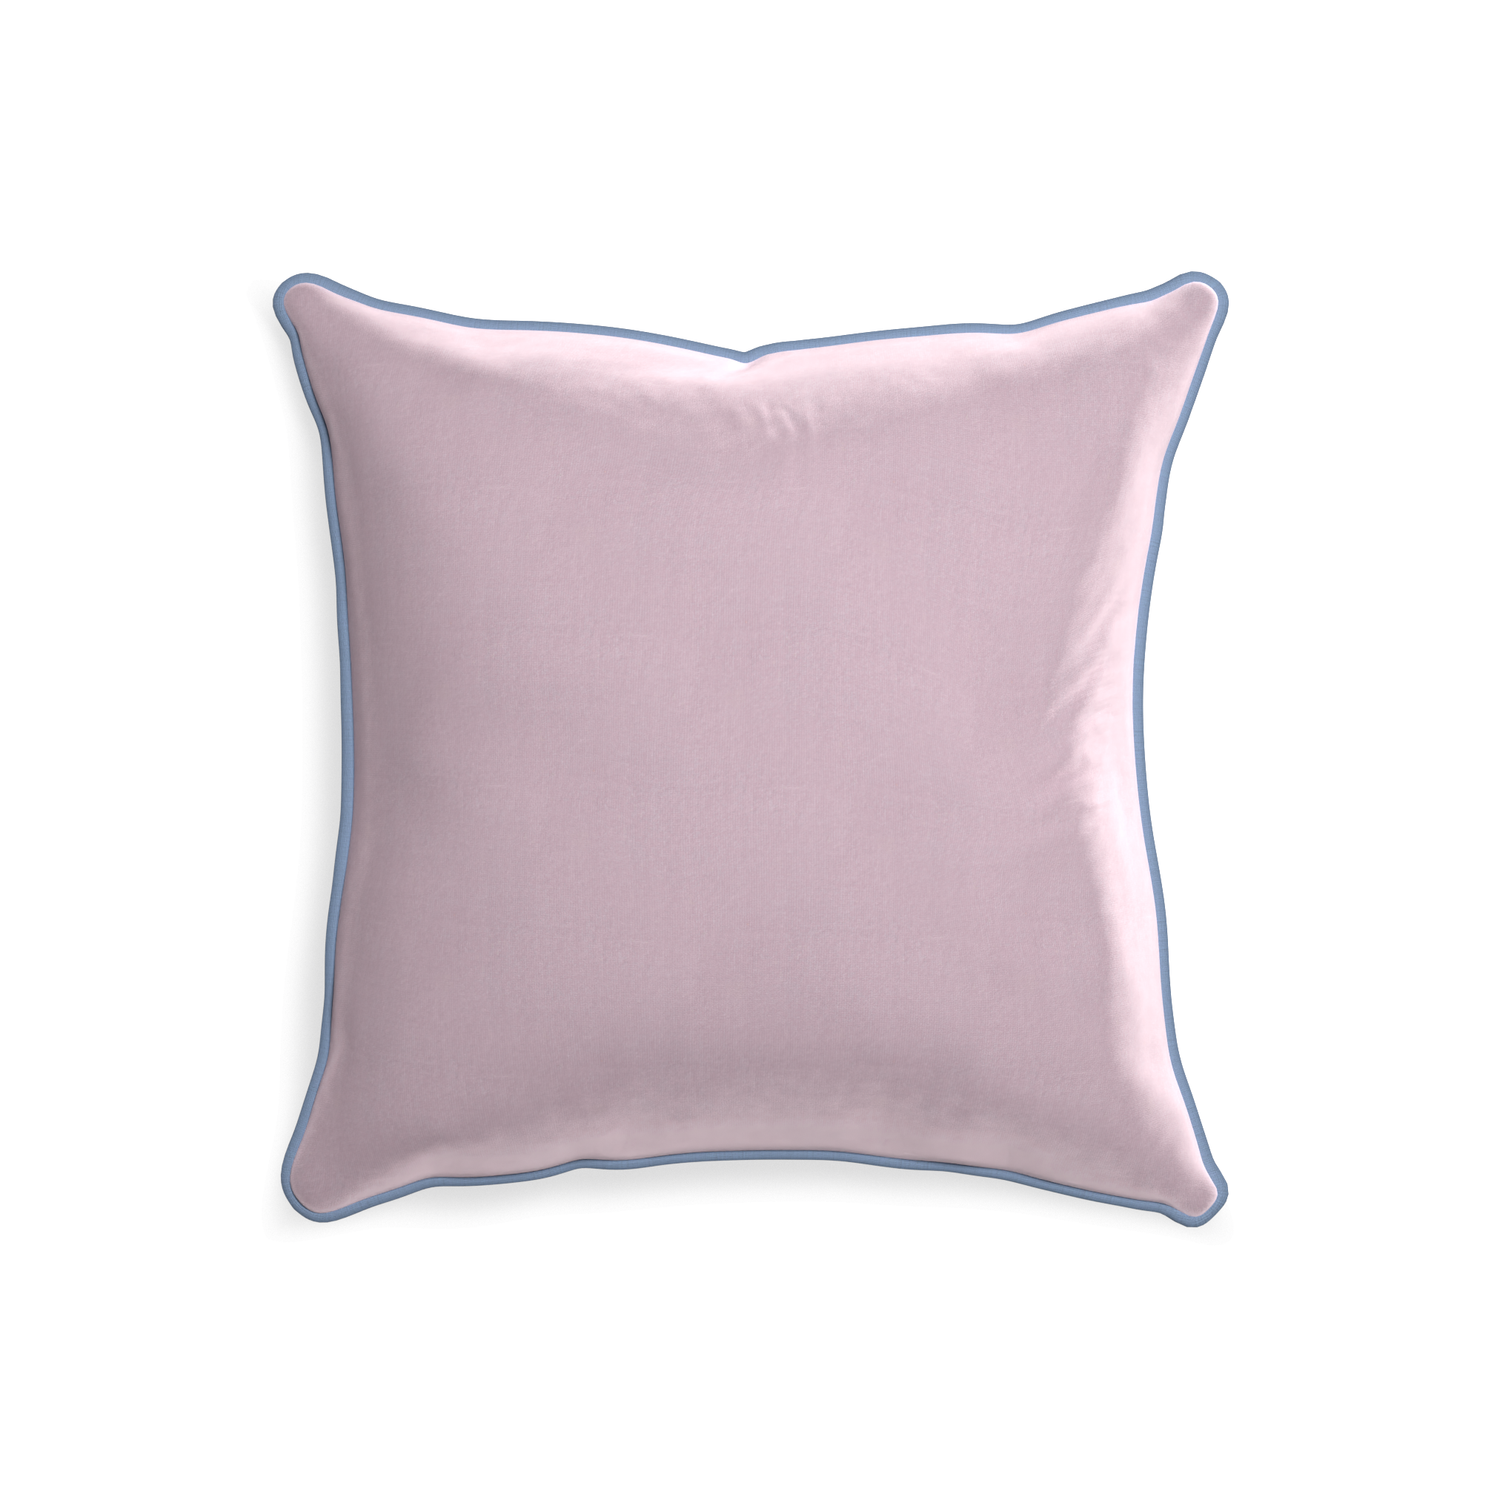 square lilac velvet pillow with sky blue piping